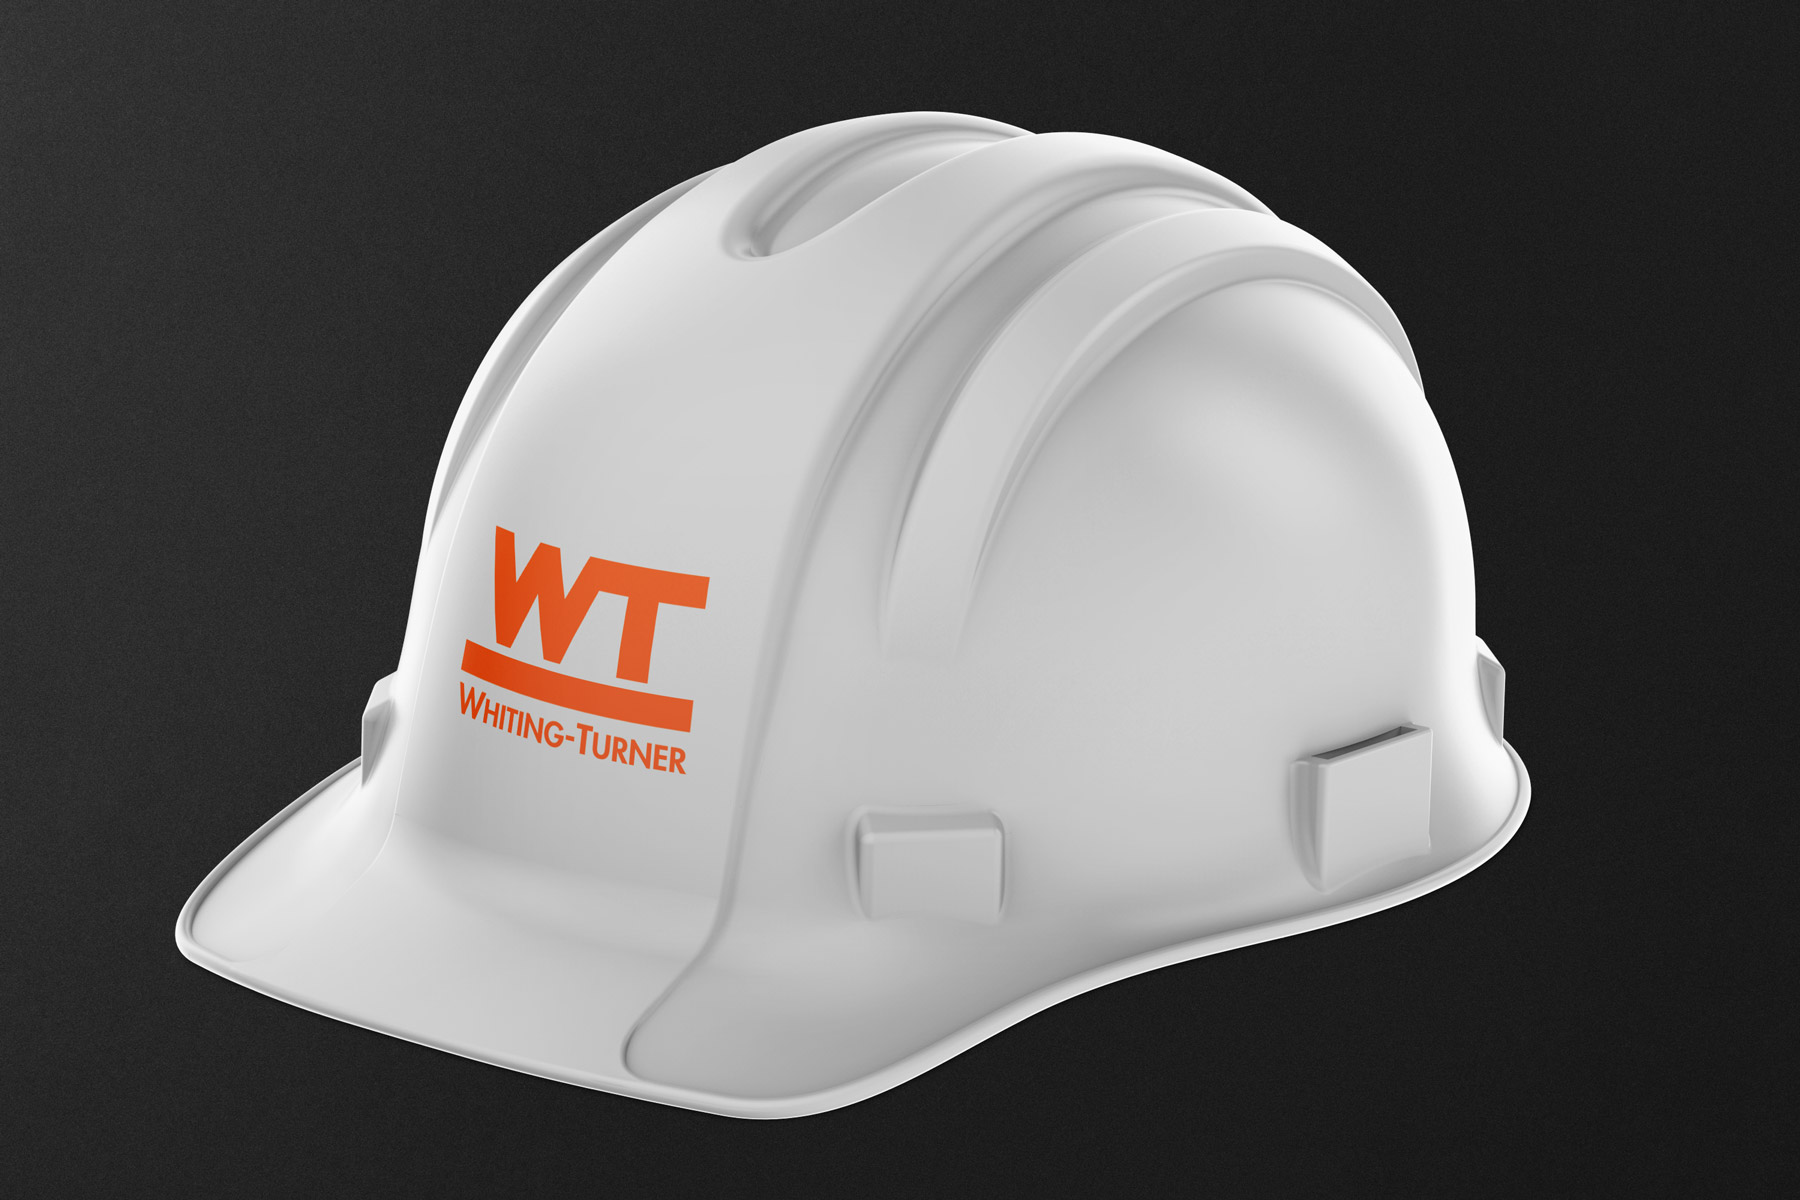 Whiting Turner - Construction Company Logo on a Hard Hat